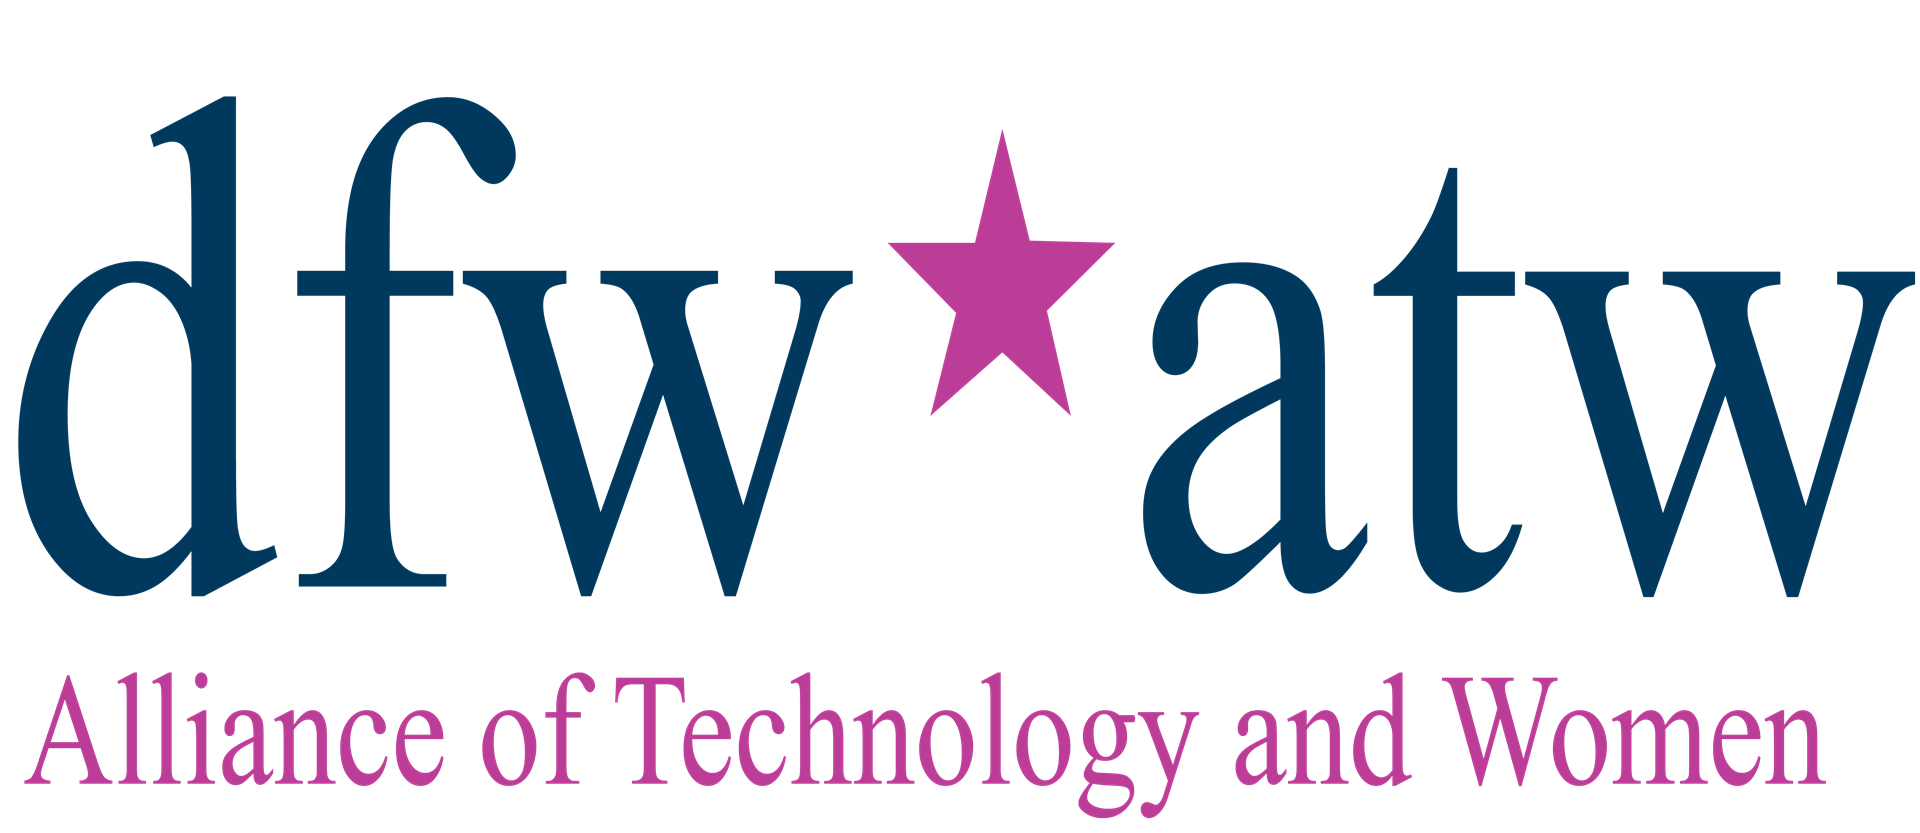 Alliance of Technology and Women - Developing Women Leaders in Technology